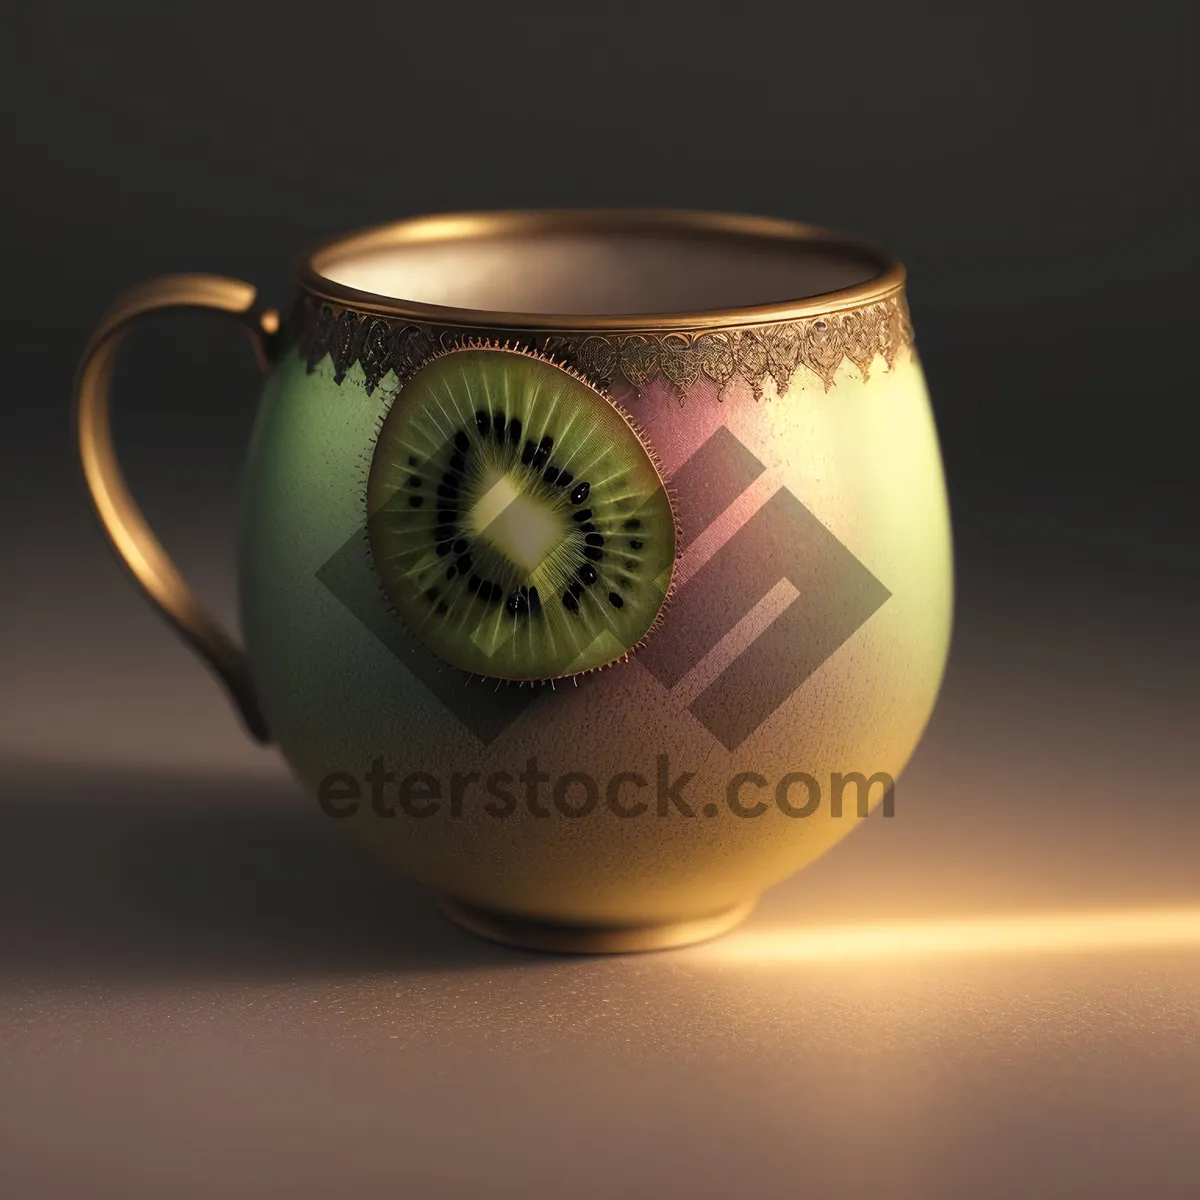 Picture of Morning Caffeine Boost - Brown Ceramic Coffee Mug on Saucer